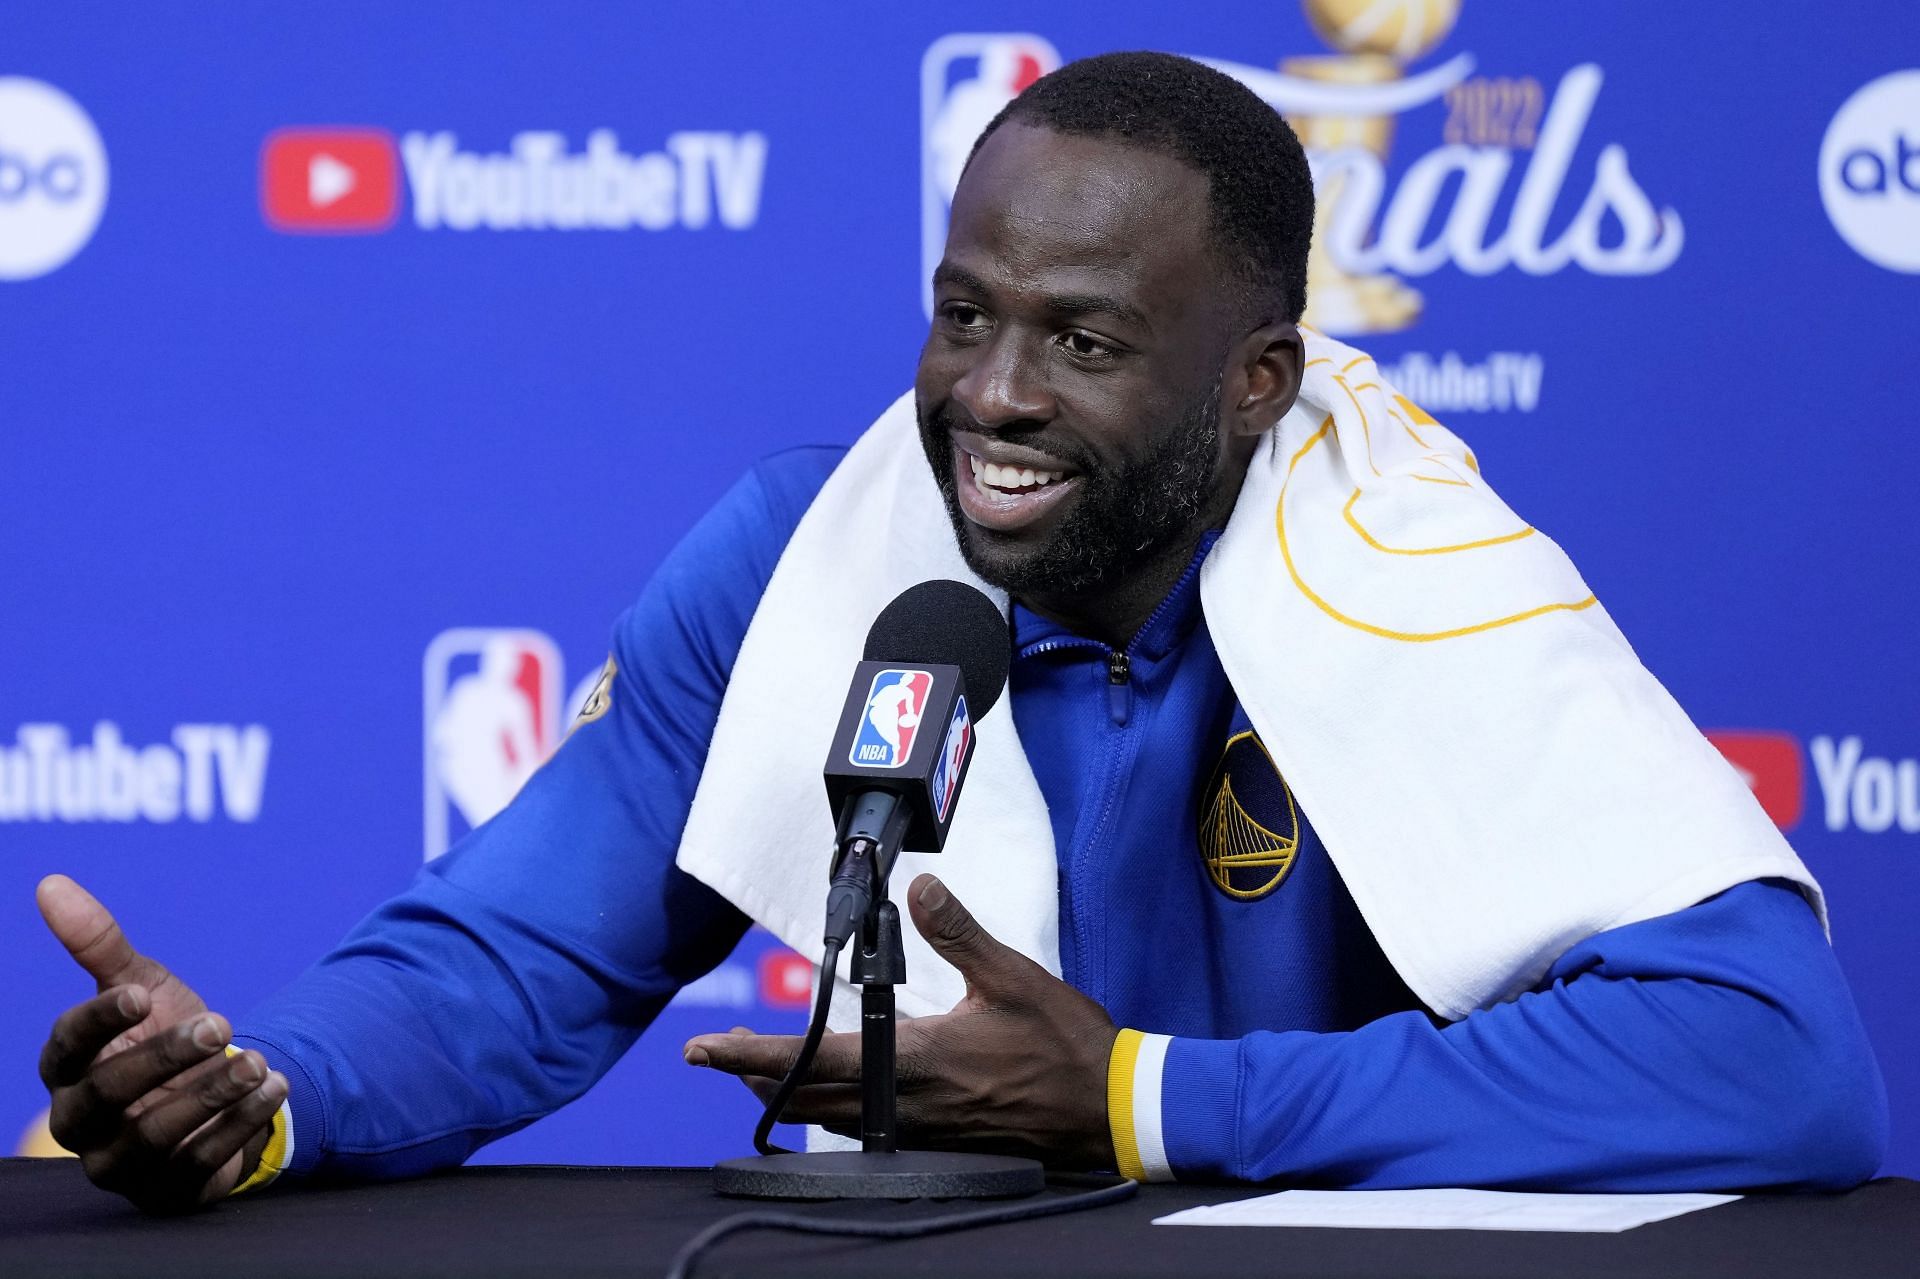 2Draymond Green wants to talk trash to fans. (Image via Getty Images)